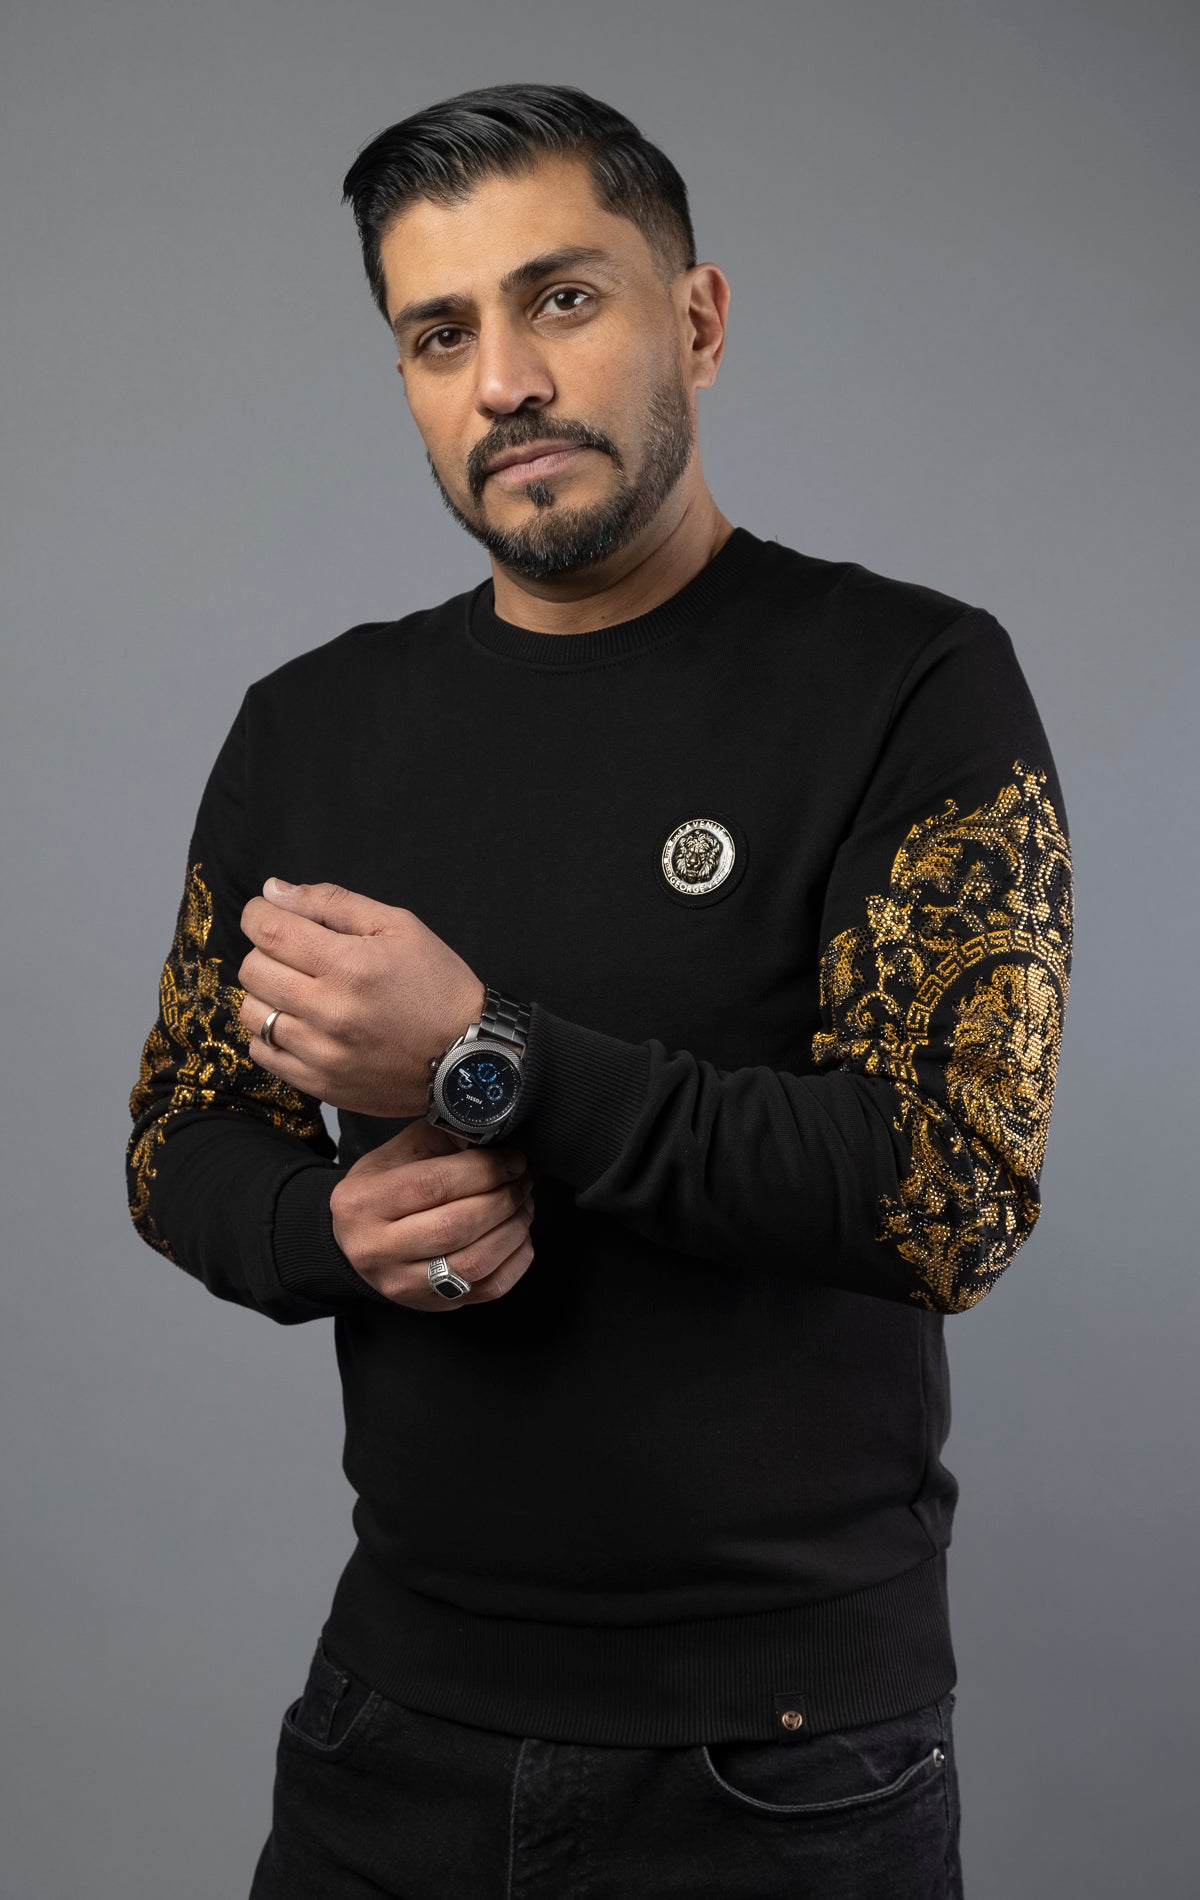 Black Soft and comfortable GV sweater with round-neck, long sleeves, and a Lion pin. The gold sleeves add a touch of elegance, making it suitable for daily wear. Made with soft cotton for ultimate comfort.